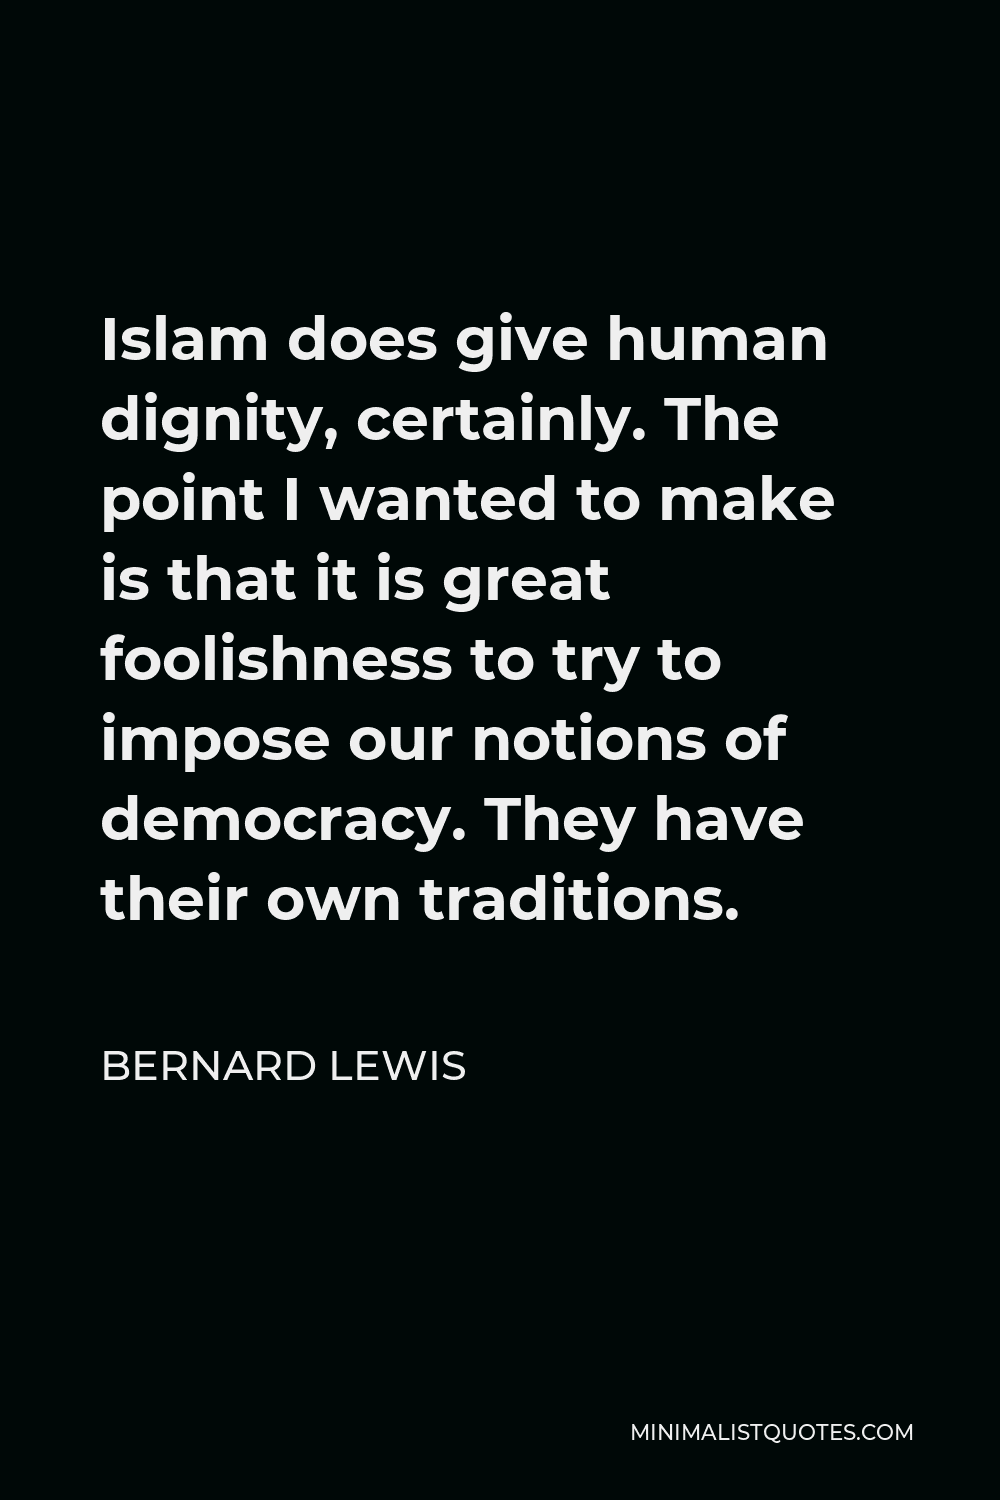 Bernard Lewis Quote - Islam does give human dignity, certainly. The point I wanted to make is that it is great foolishness to try to impose our notions of democracy. They have their own traditions.